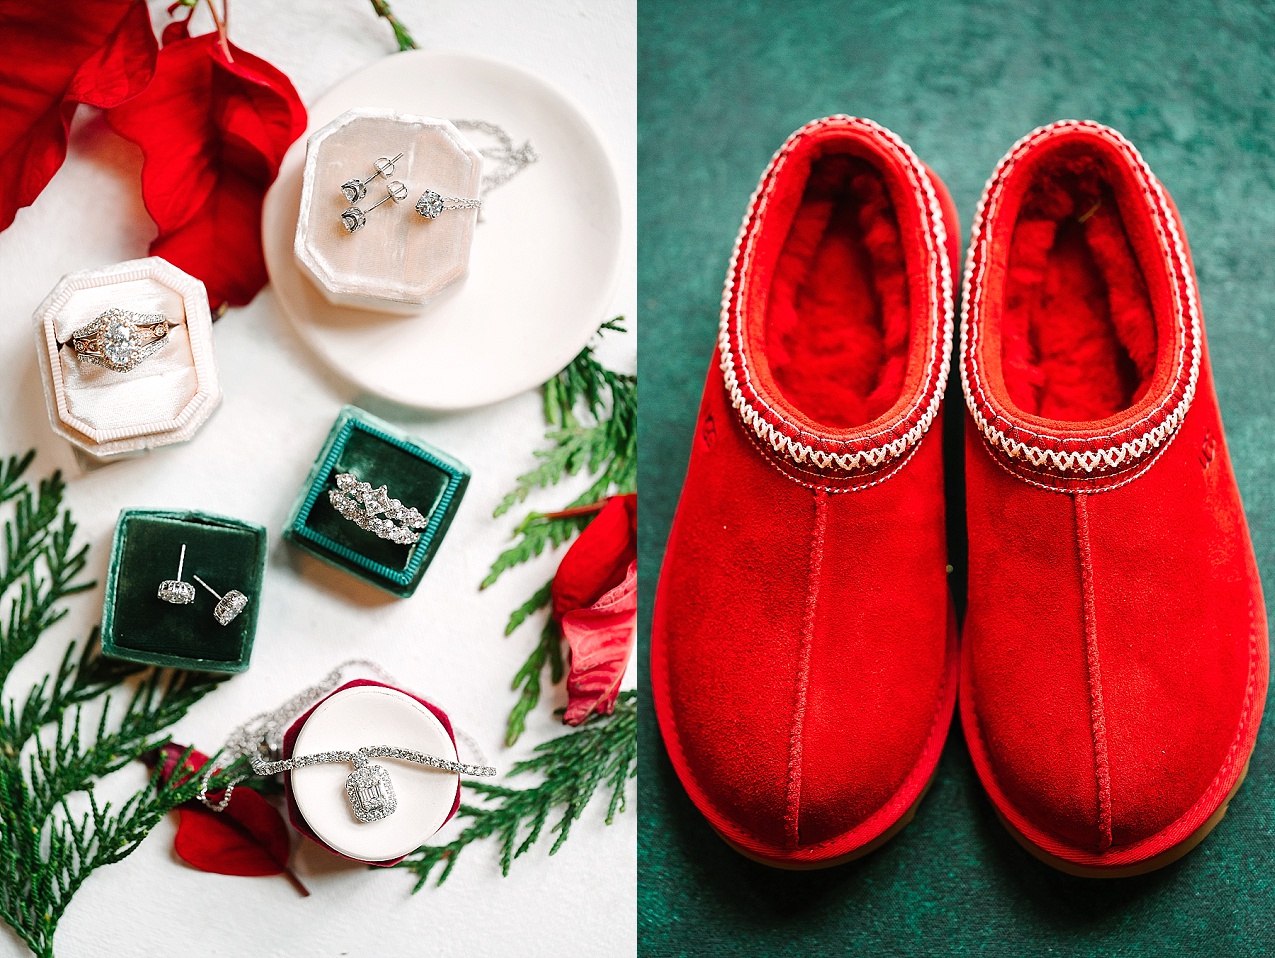 Wintery Pine River Ranch wedding brides reception ugg slippers